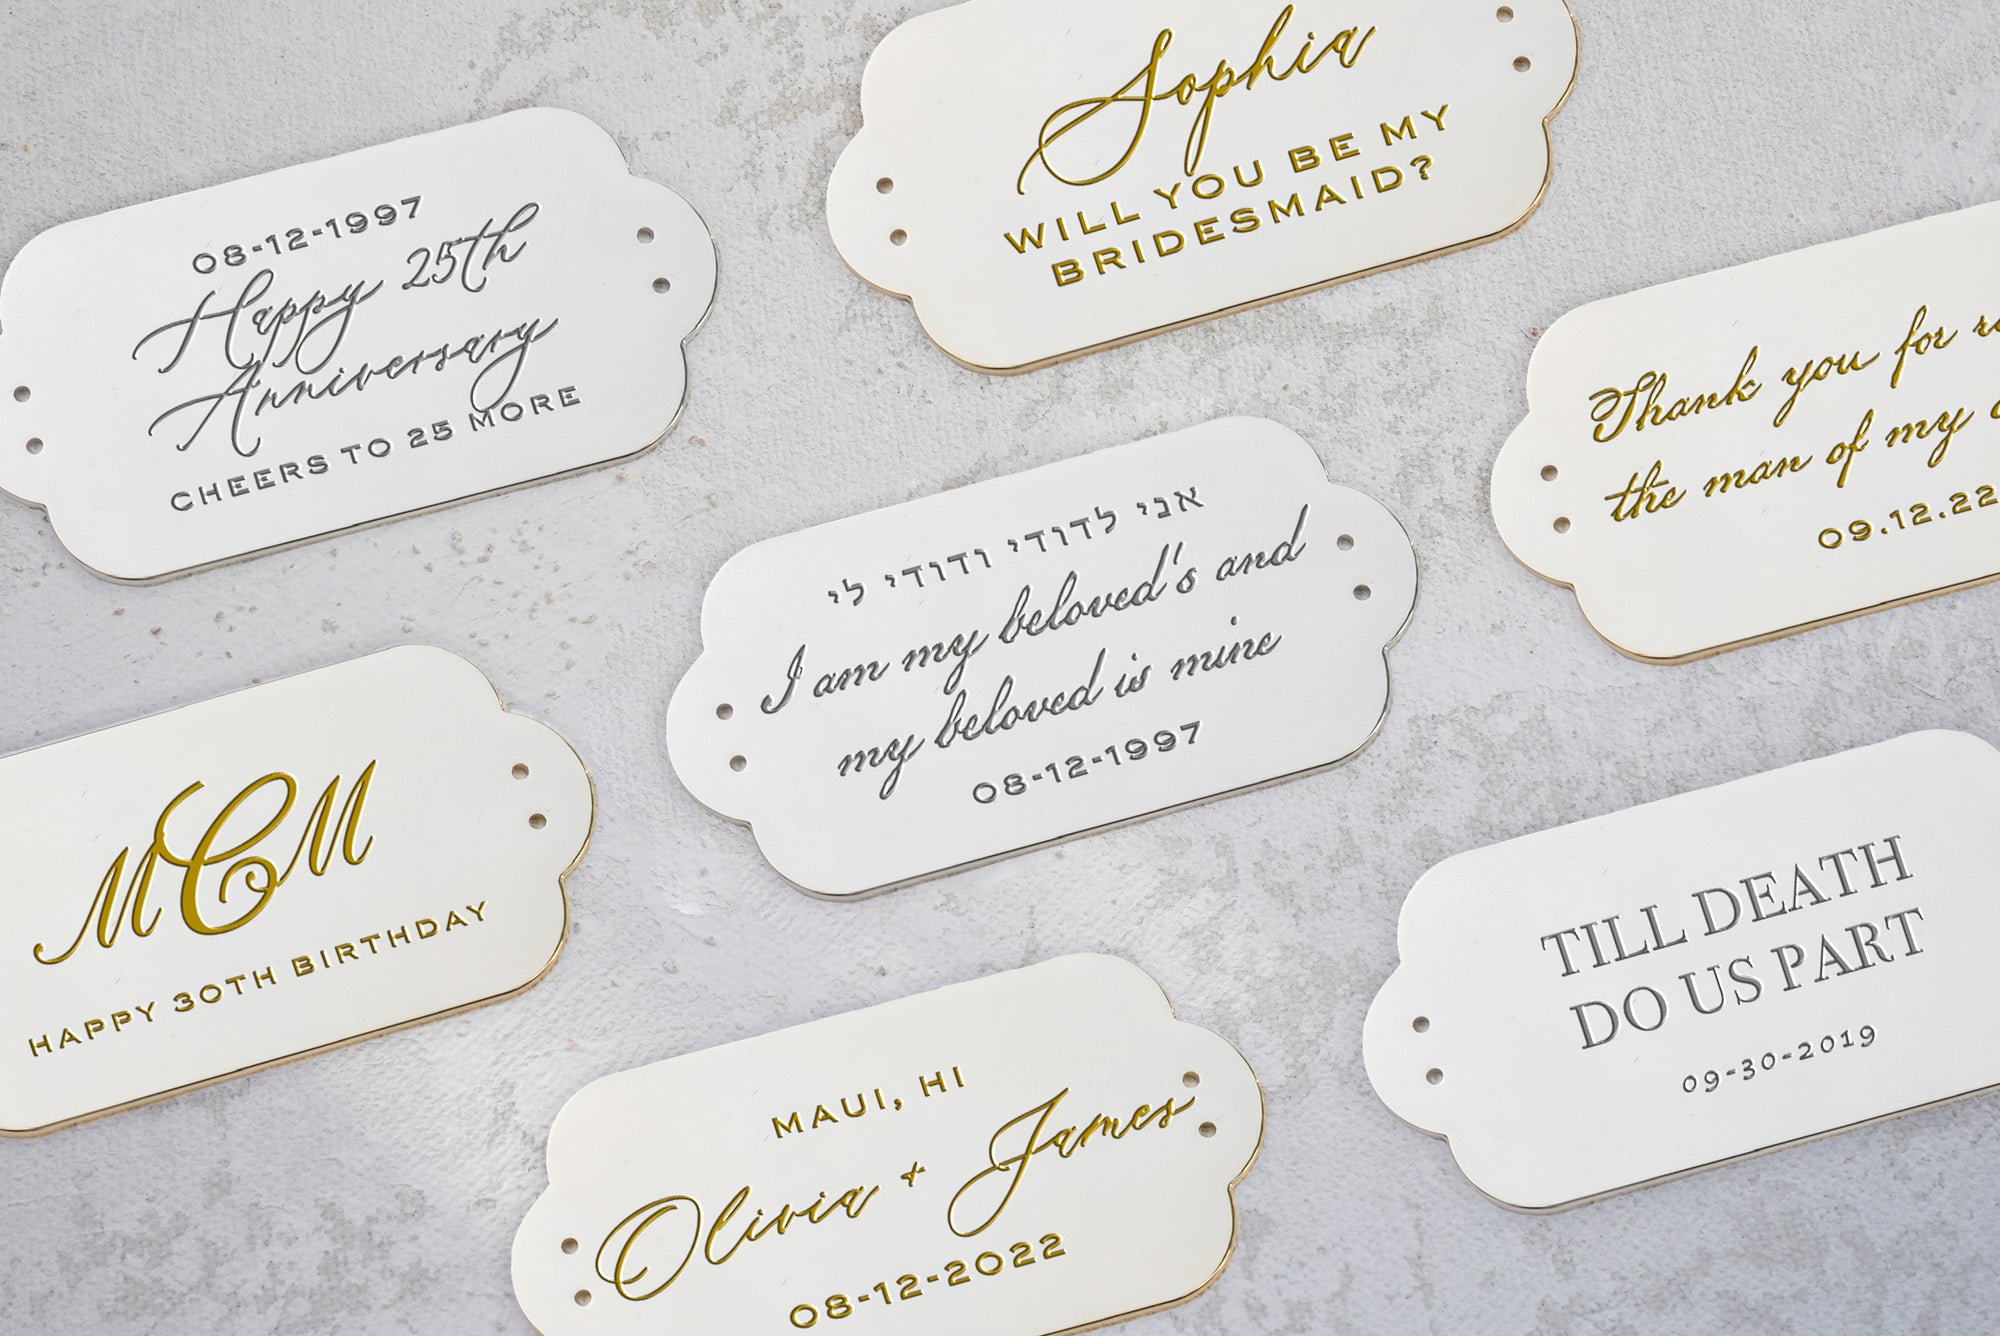 Assorted personalized Bella Clutch Cinderella Blue Petite celebration cards with elegant calligraphy on a textured background, perfect as a custom wedding accessory from The Bella Rosa Collection.